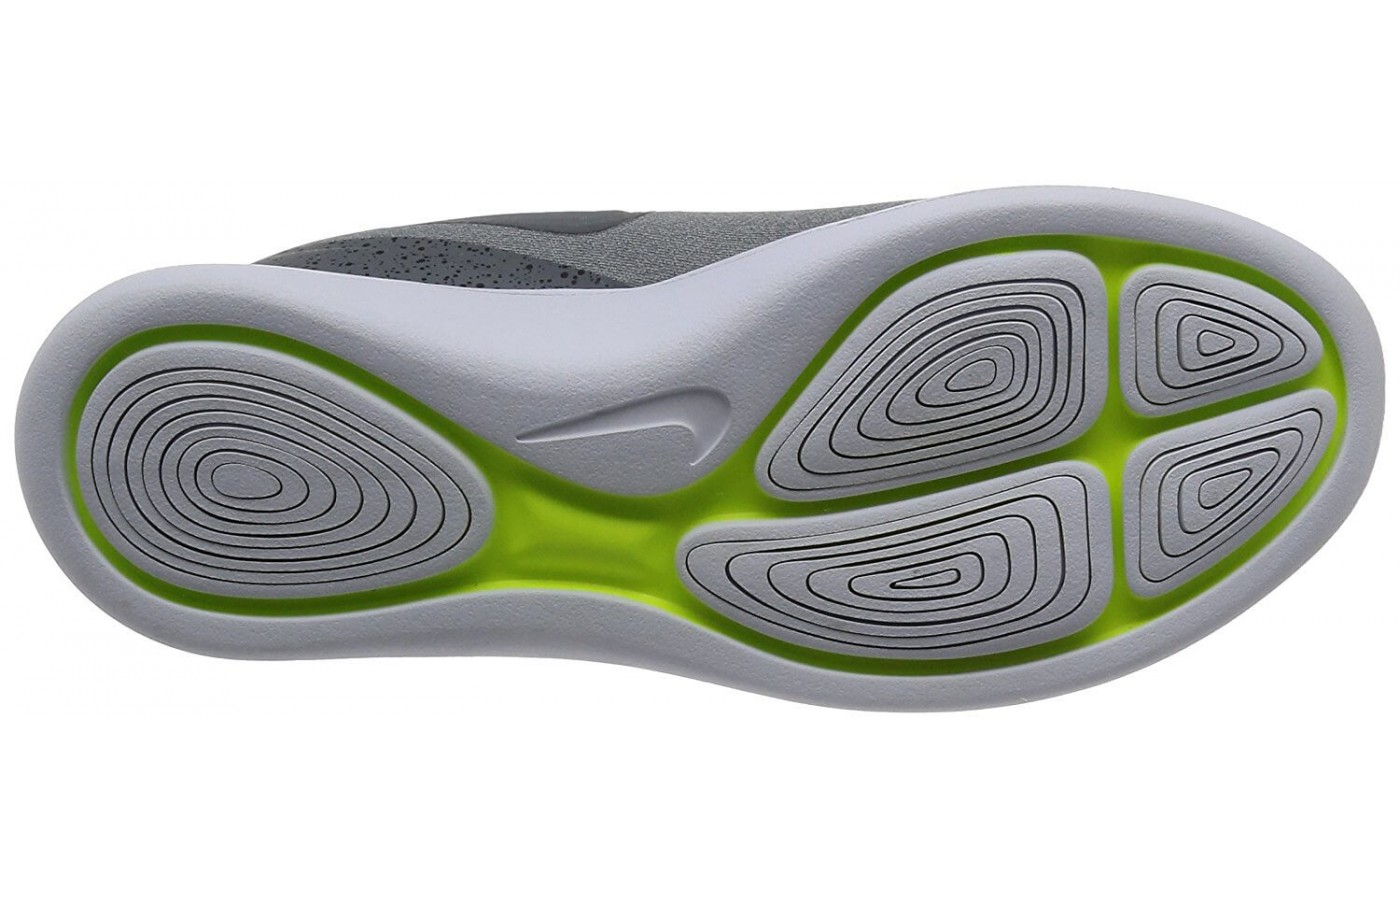 The outsole of the Nike LunarCharge Essential has multiple small grooves to improve their flexibility.